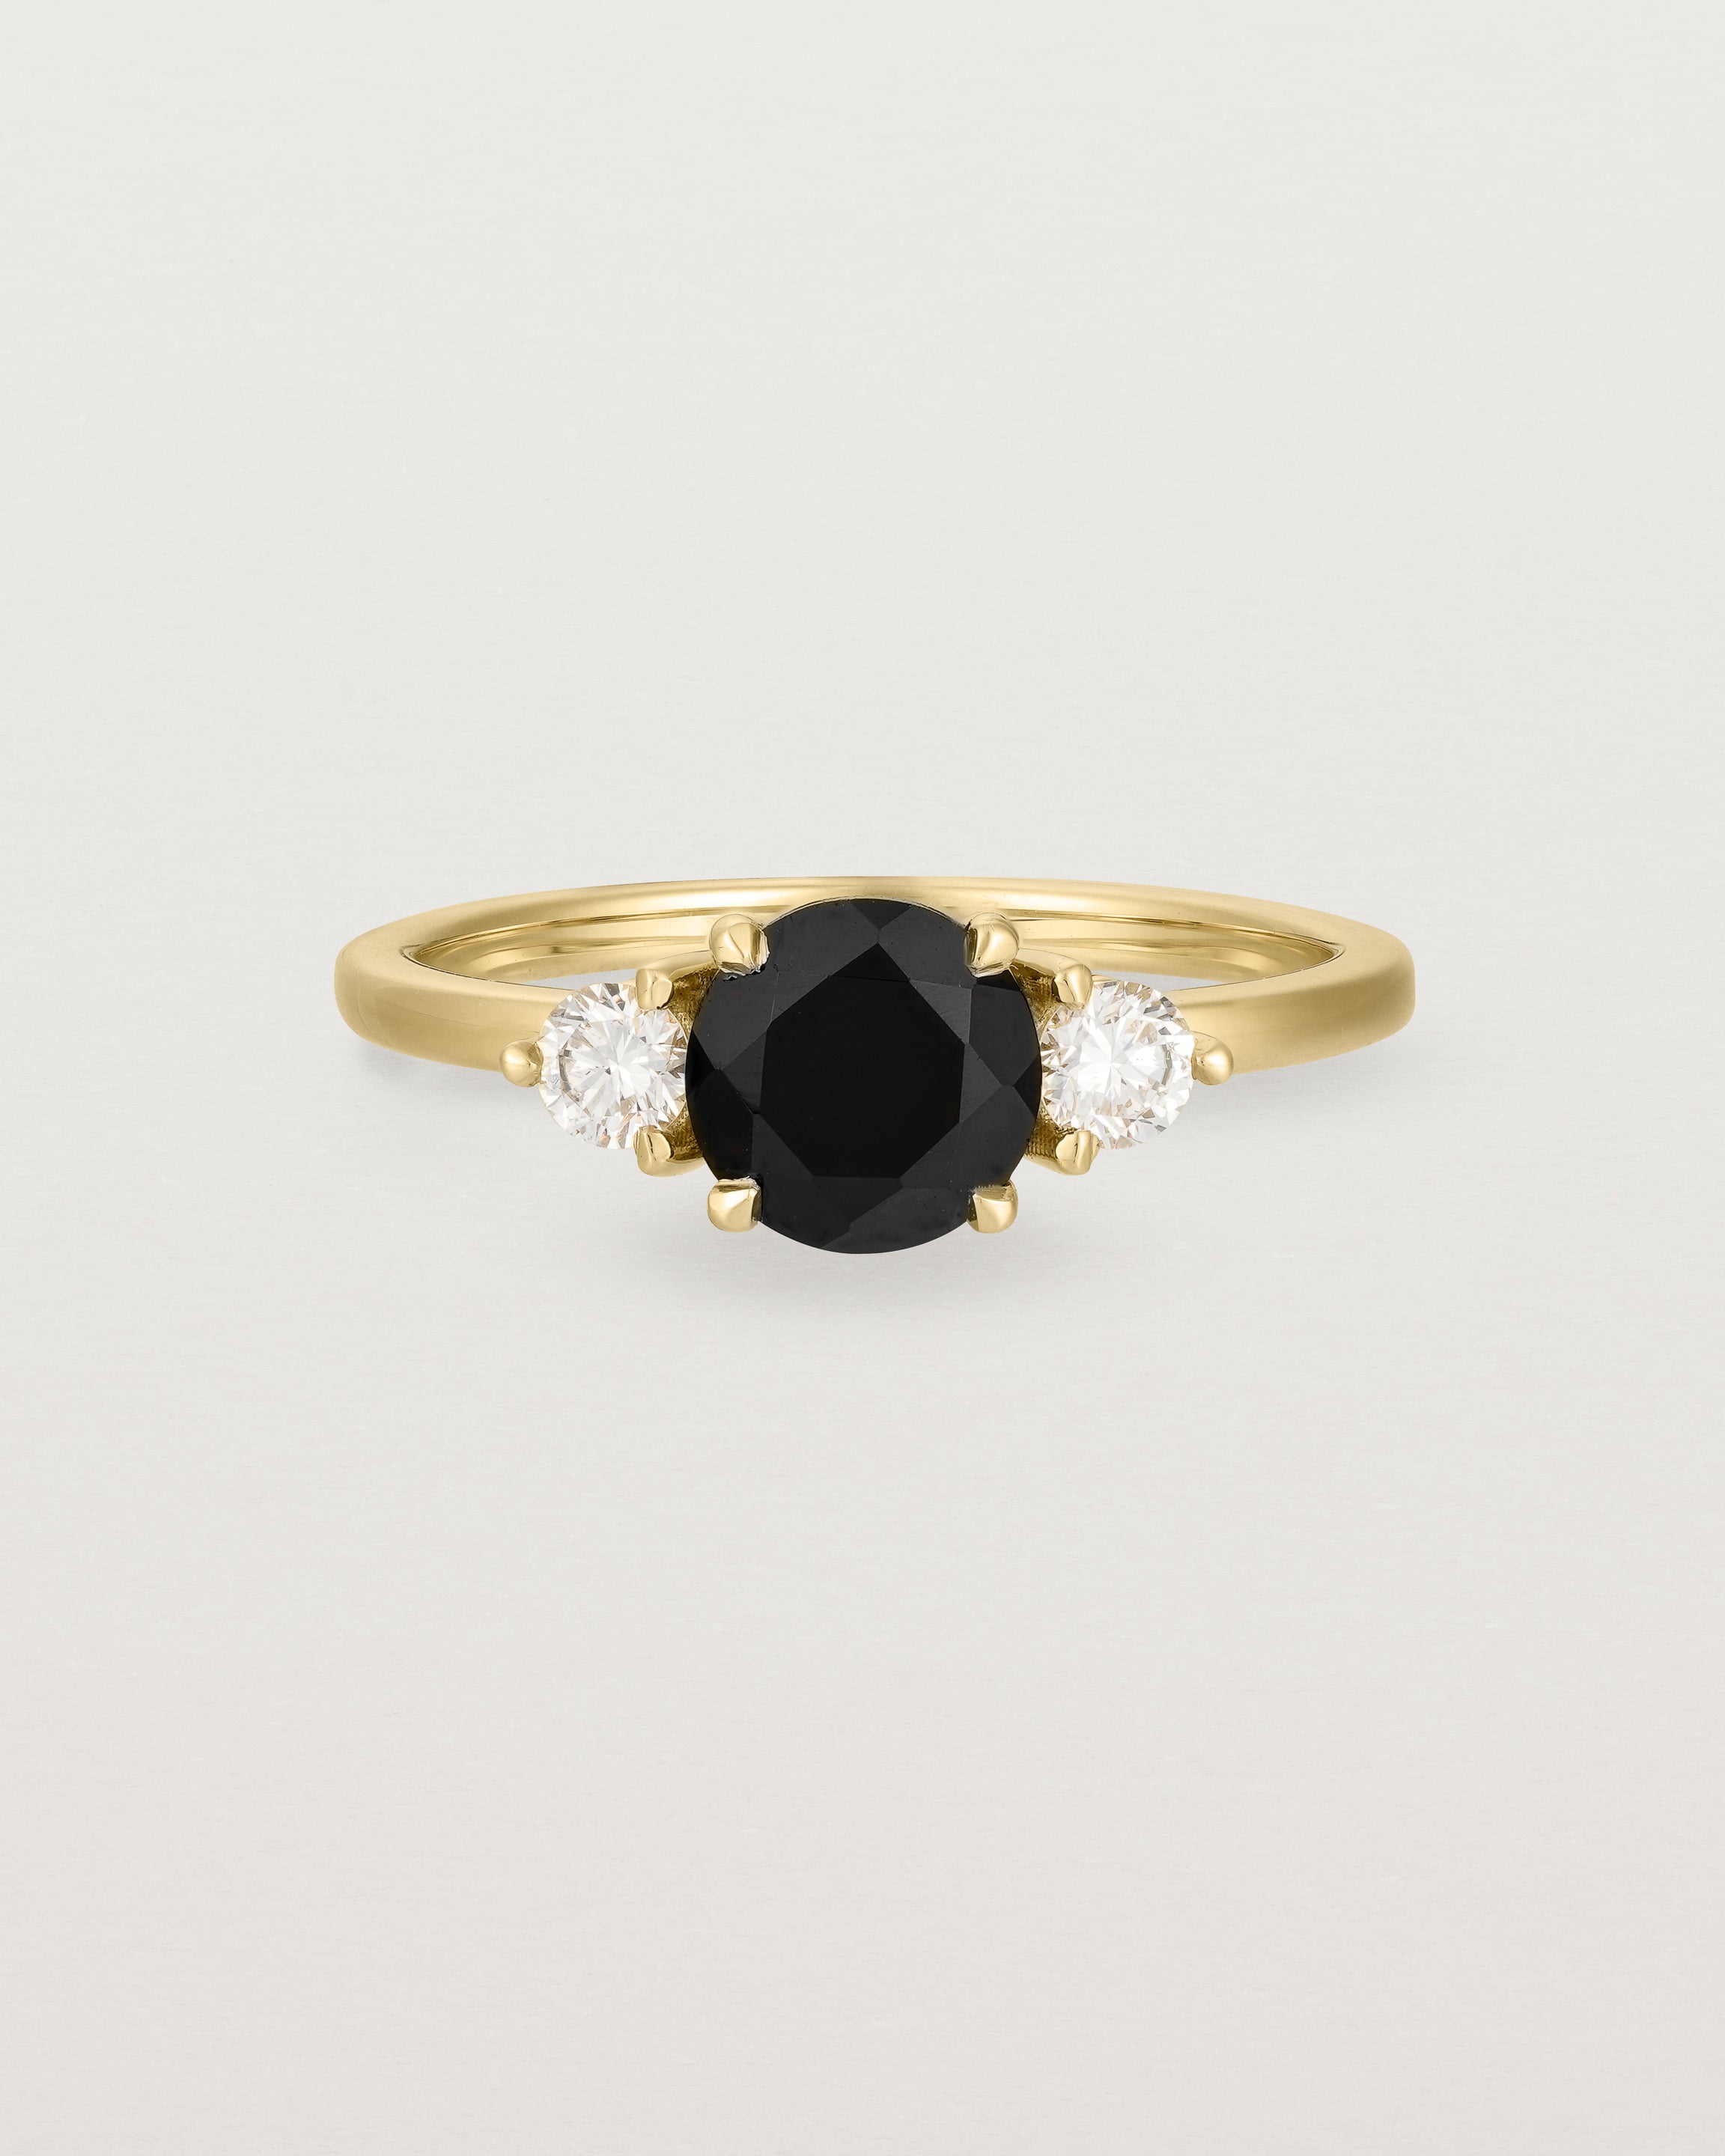 Front view of the Petite Una Round Trio Ring | Black Spinel & Diamonds | Yellow Gold.